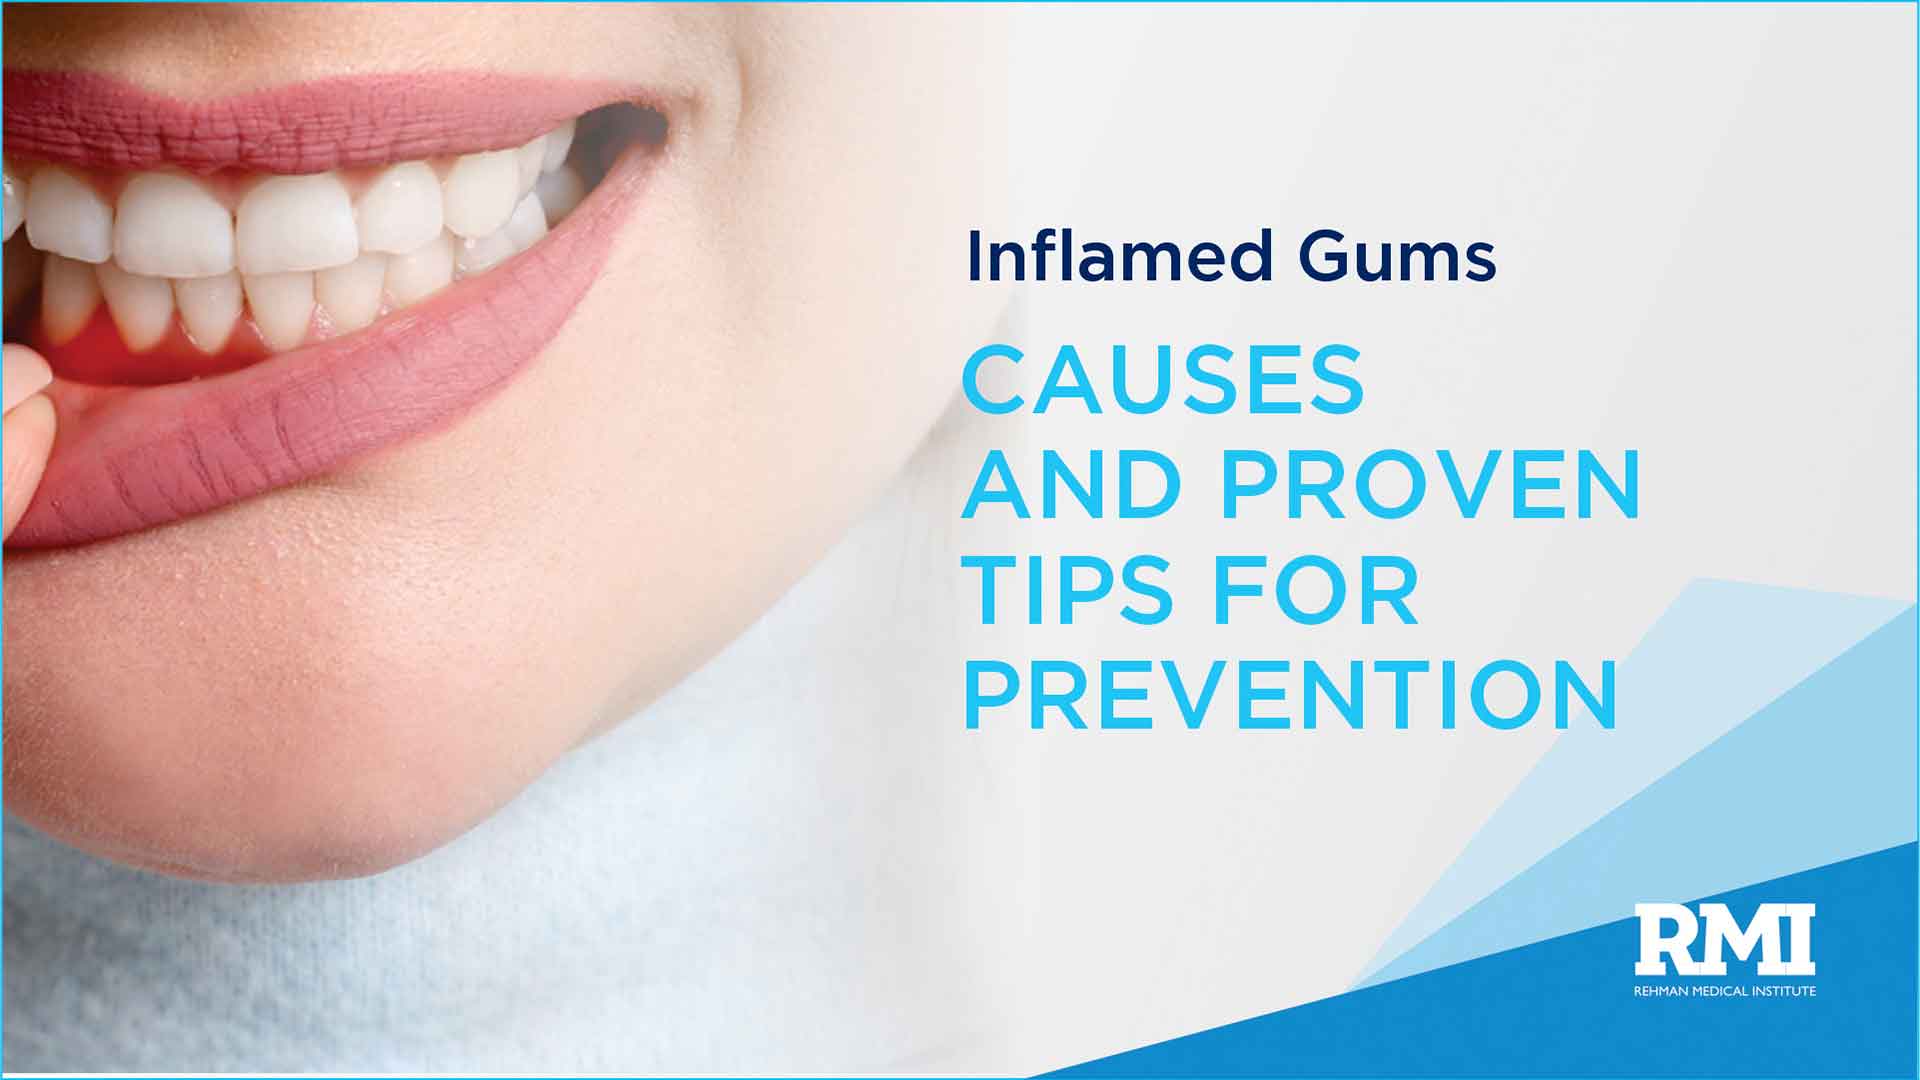 Inflamed Gums: Causes and Proven Tips for Prevention